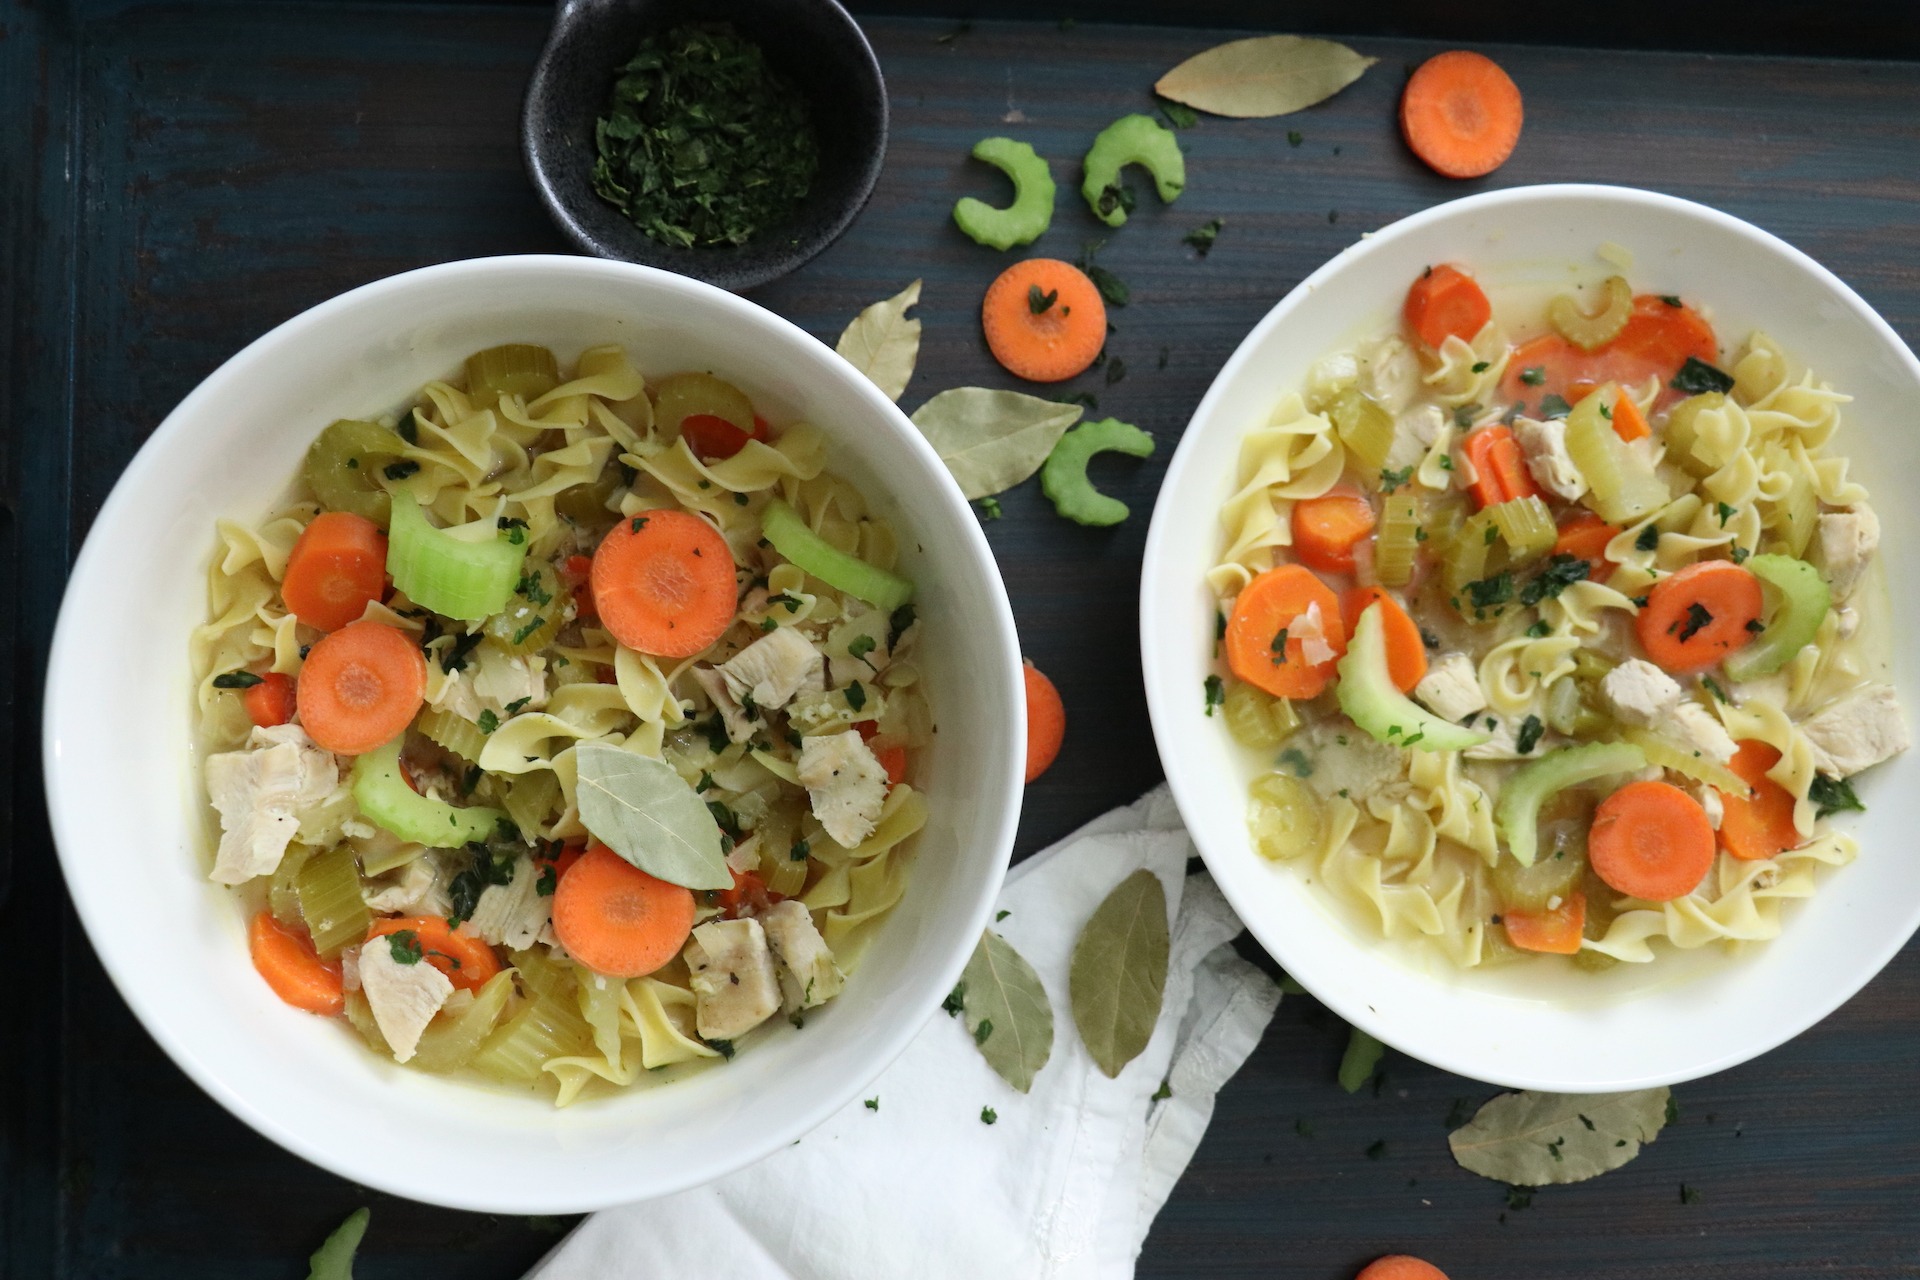 Homemade Chicken Noodle Soup Recipe | Best Healthy Recipe From Scratch